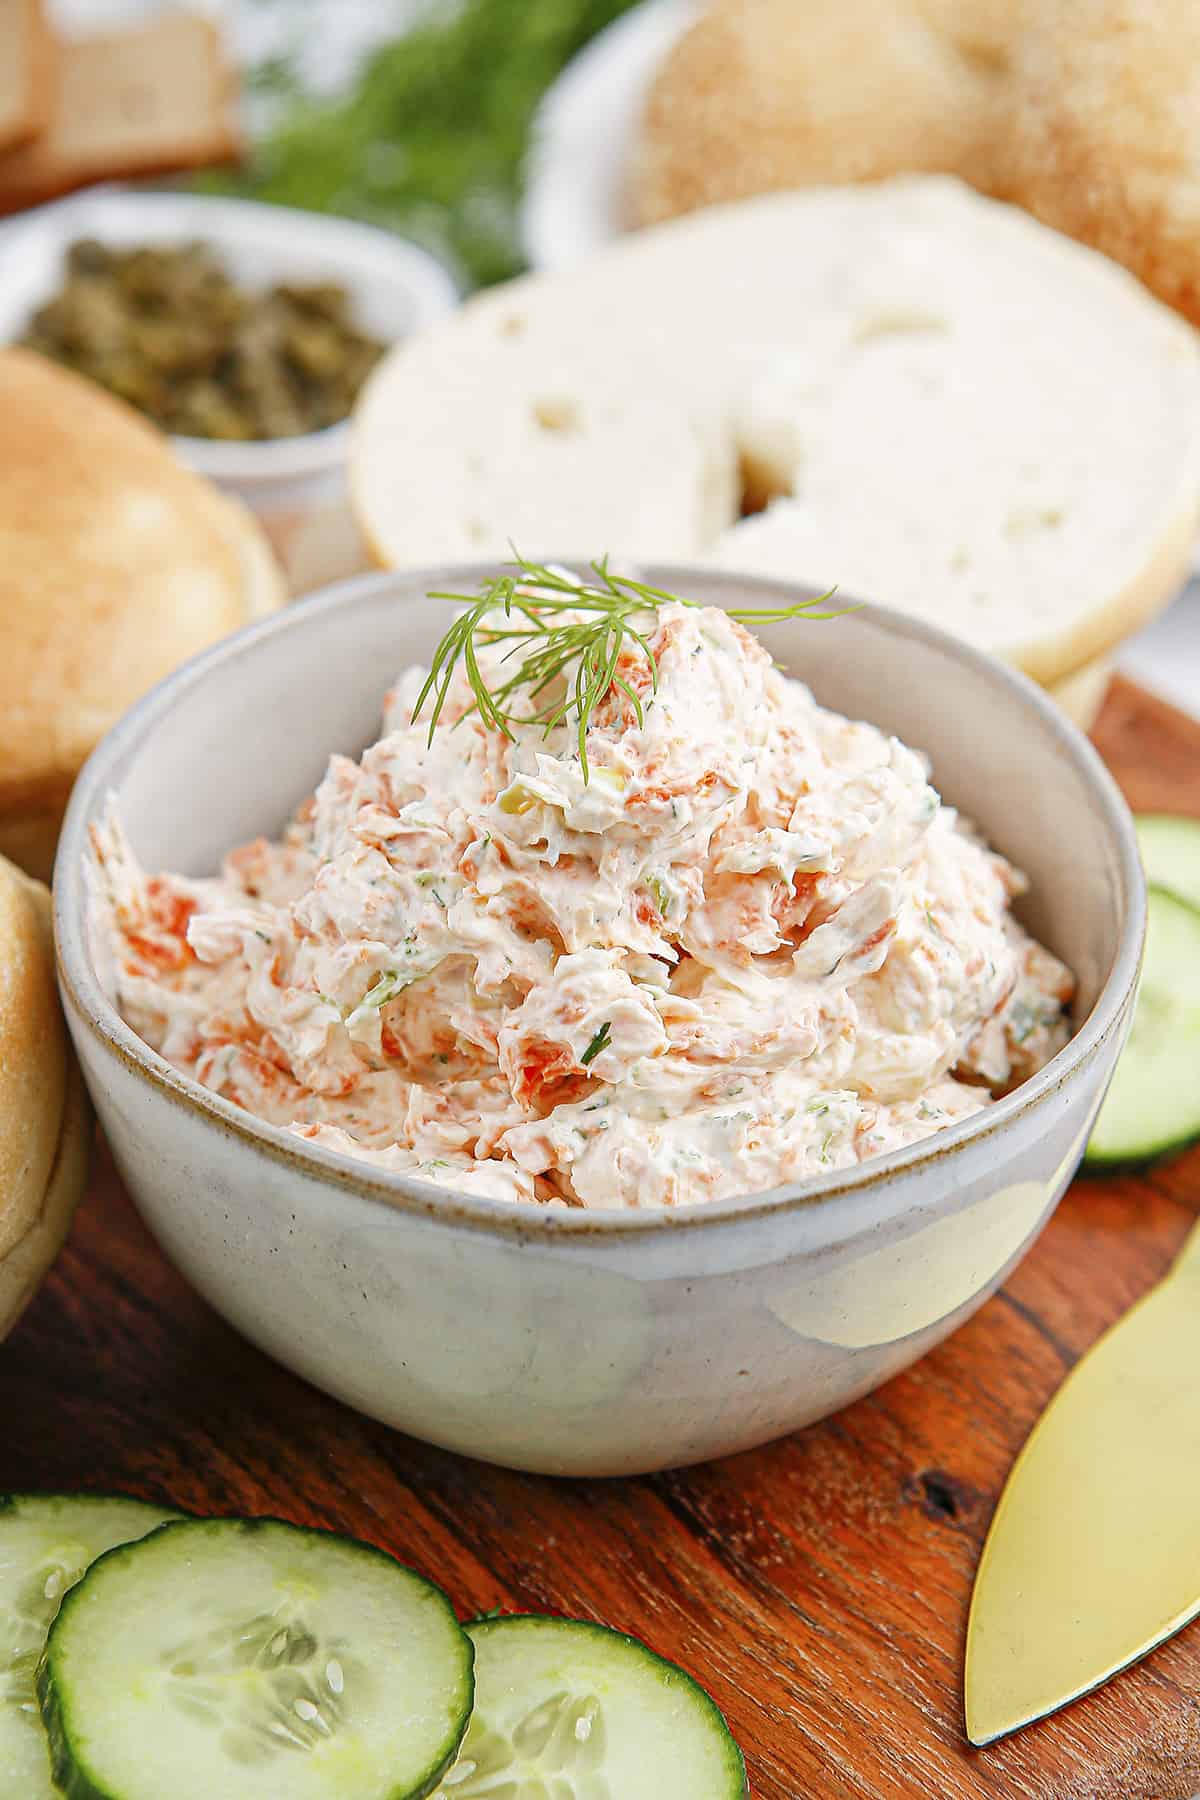 Cream cheese and salmon mixture in bowl.